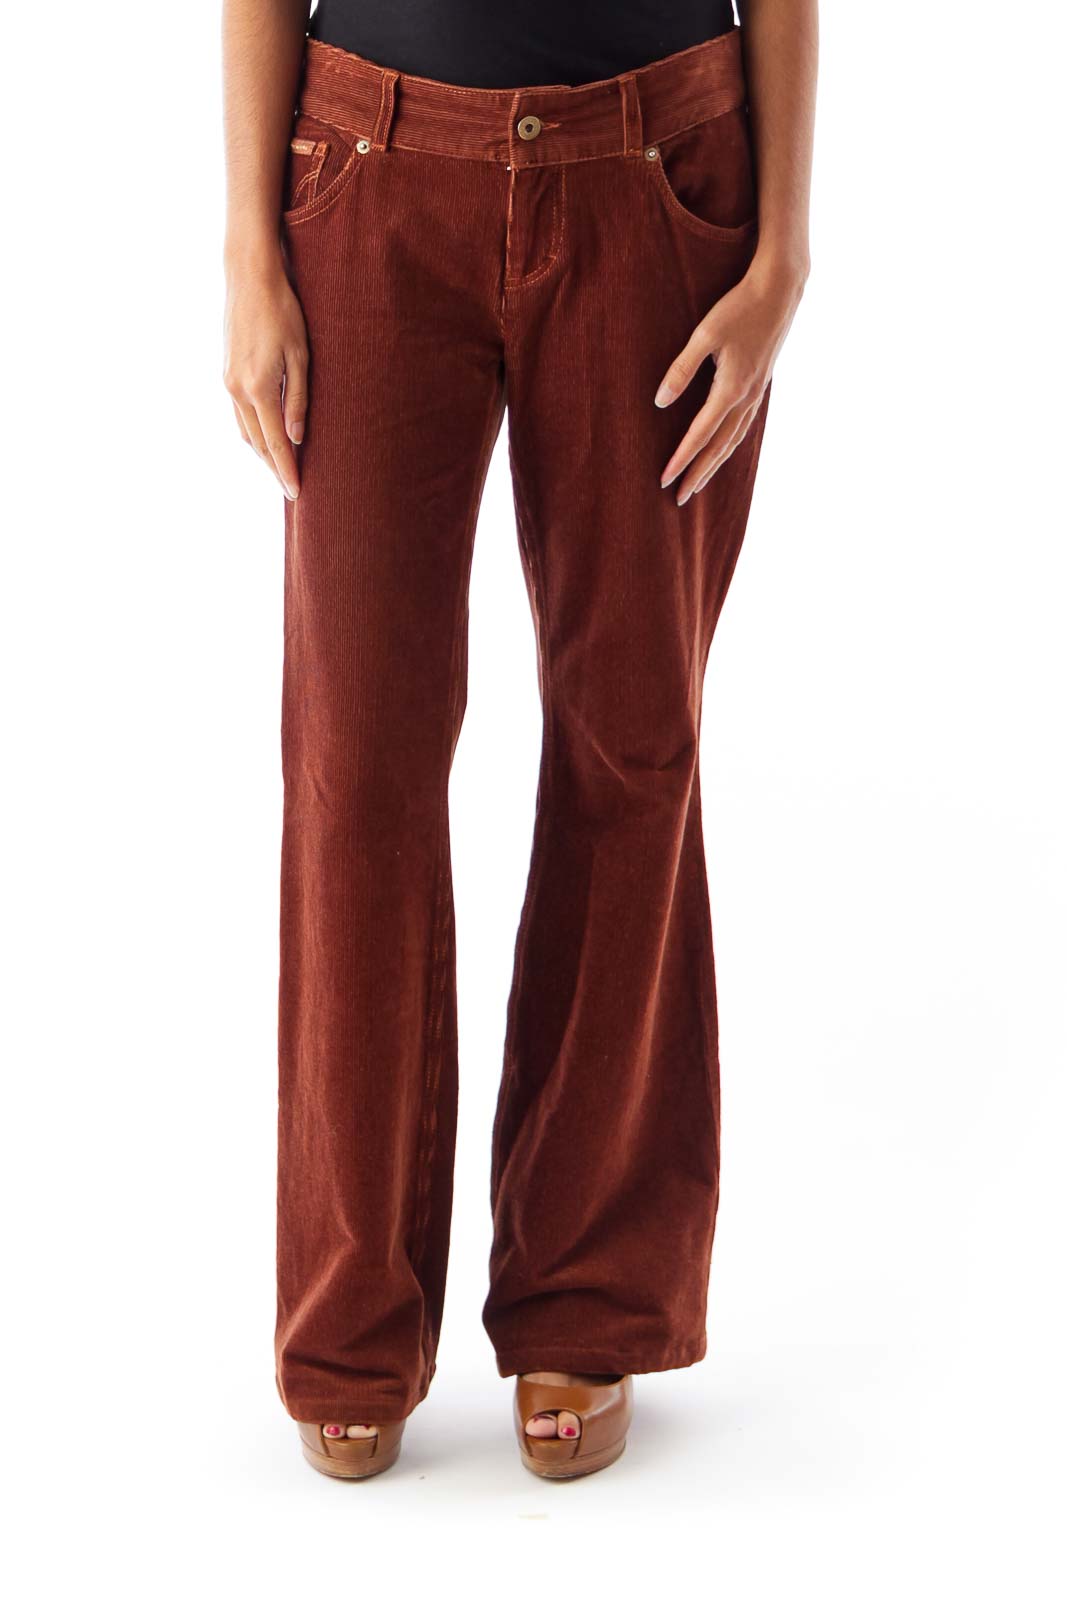 Brown Corduroy Flare Pants Front